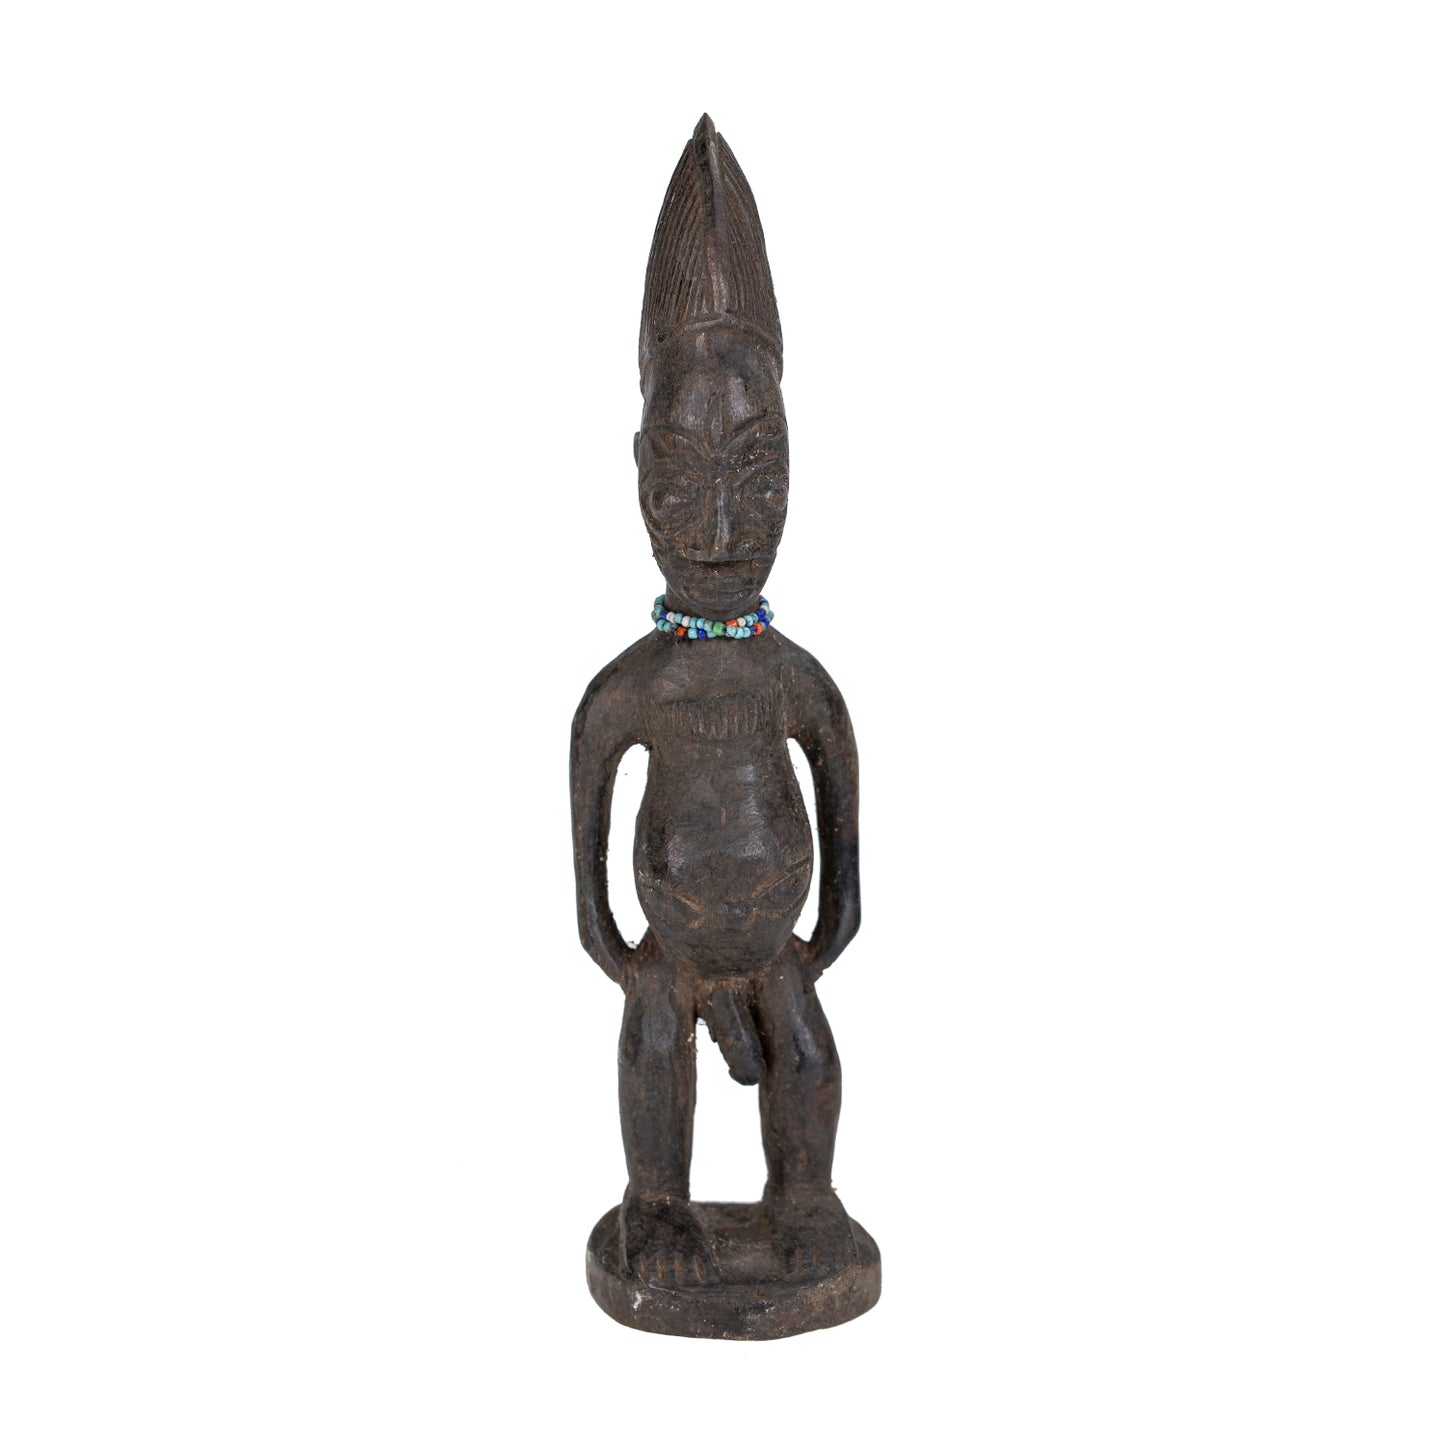 Wooden ibeji with beads